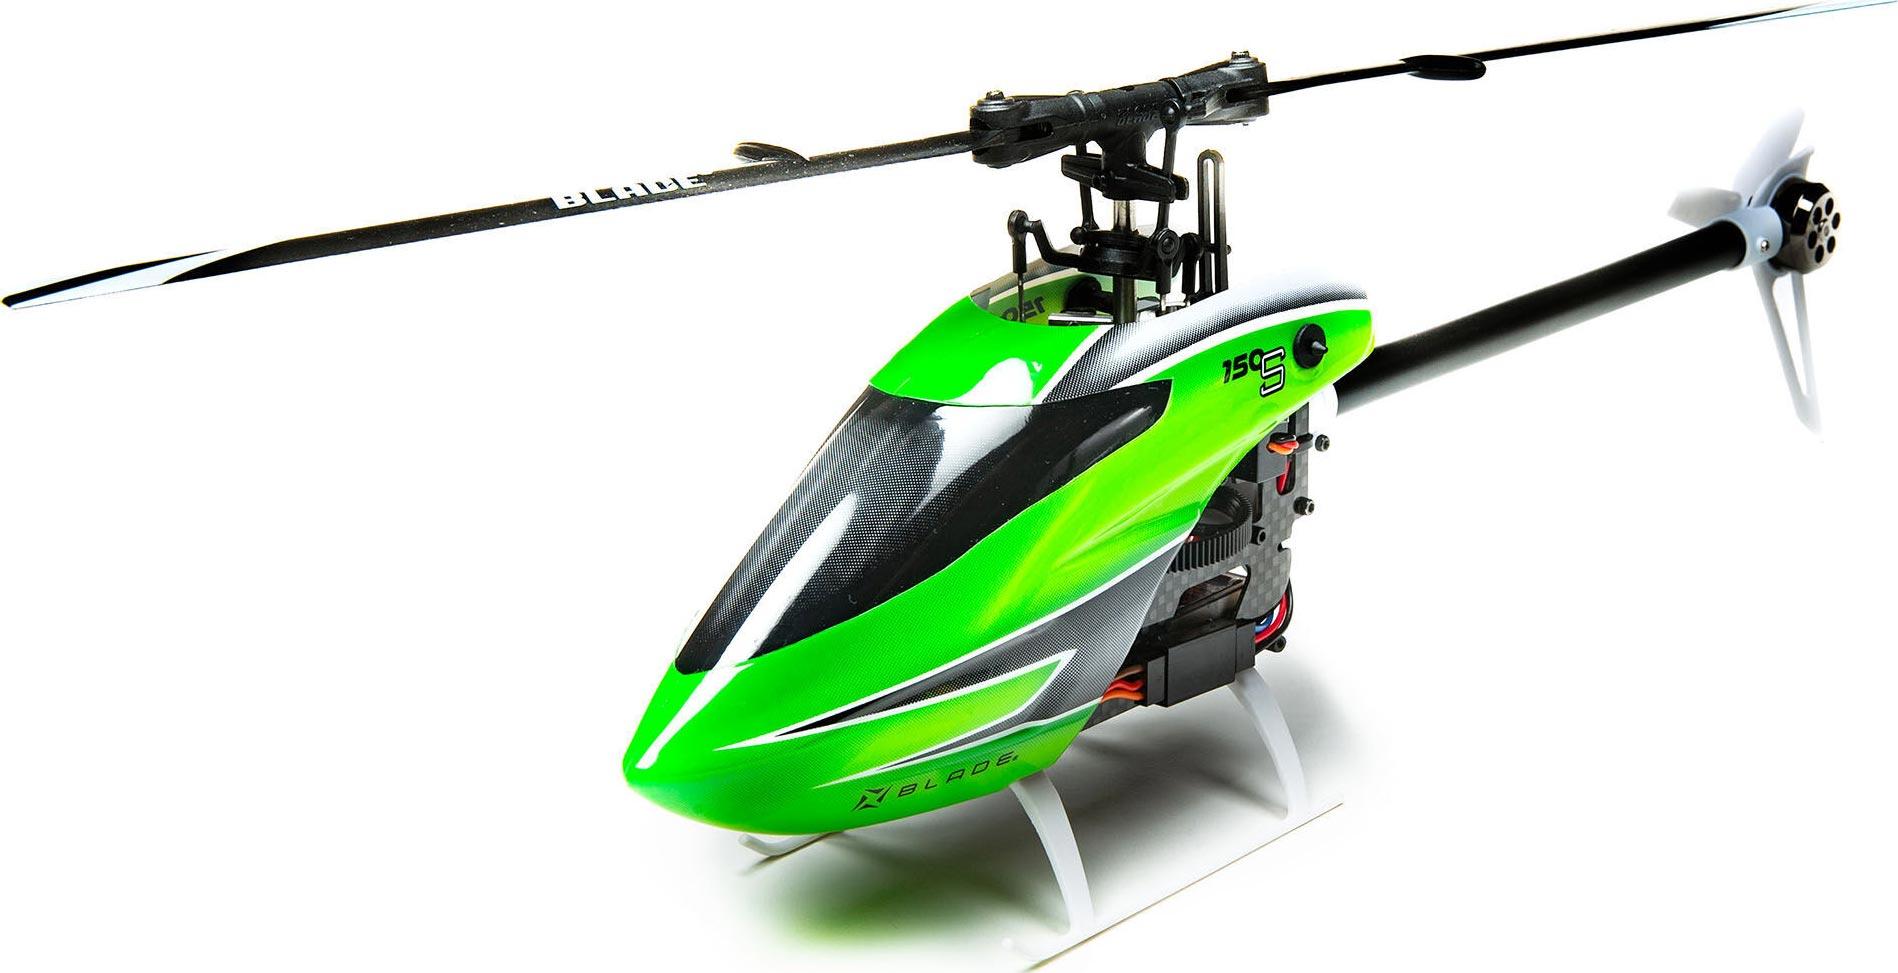 550 Size Rc Helicopter: Expert-approved versatile 550 size RC helicopters for intermediate to advanced pilots